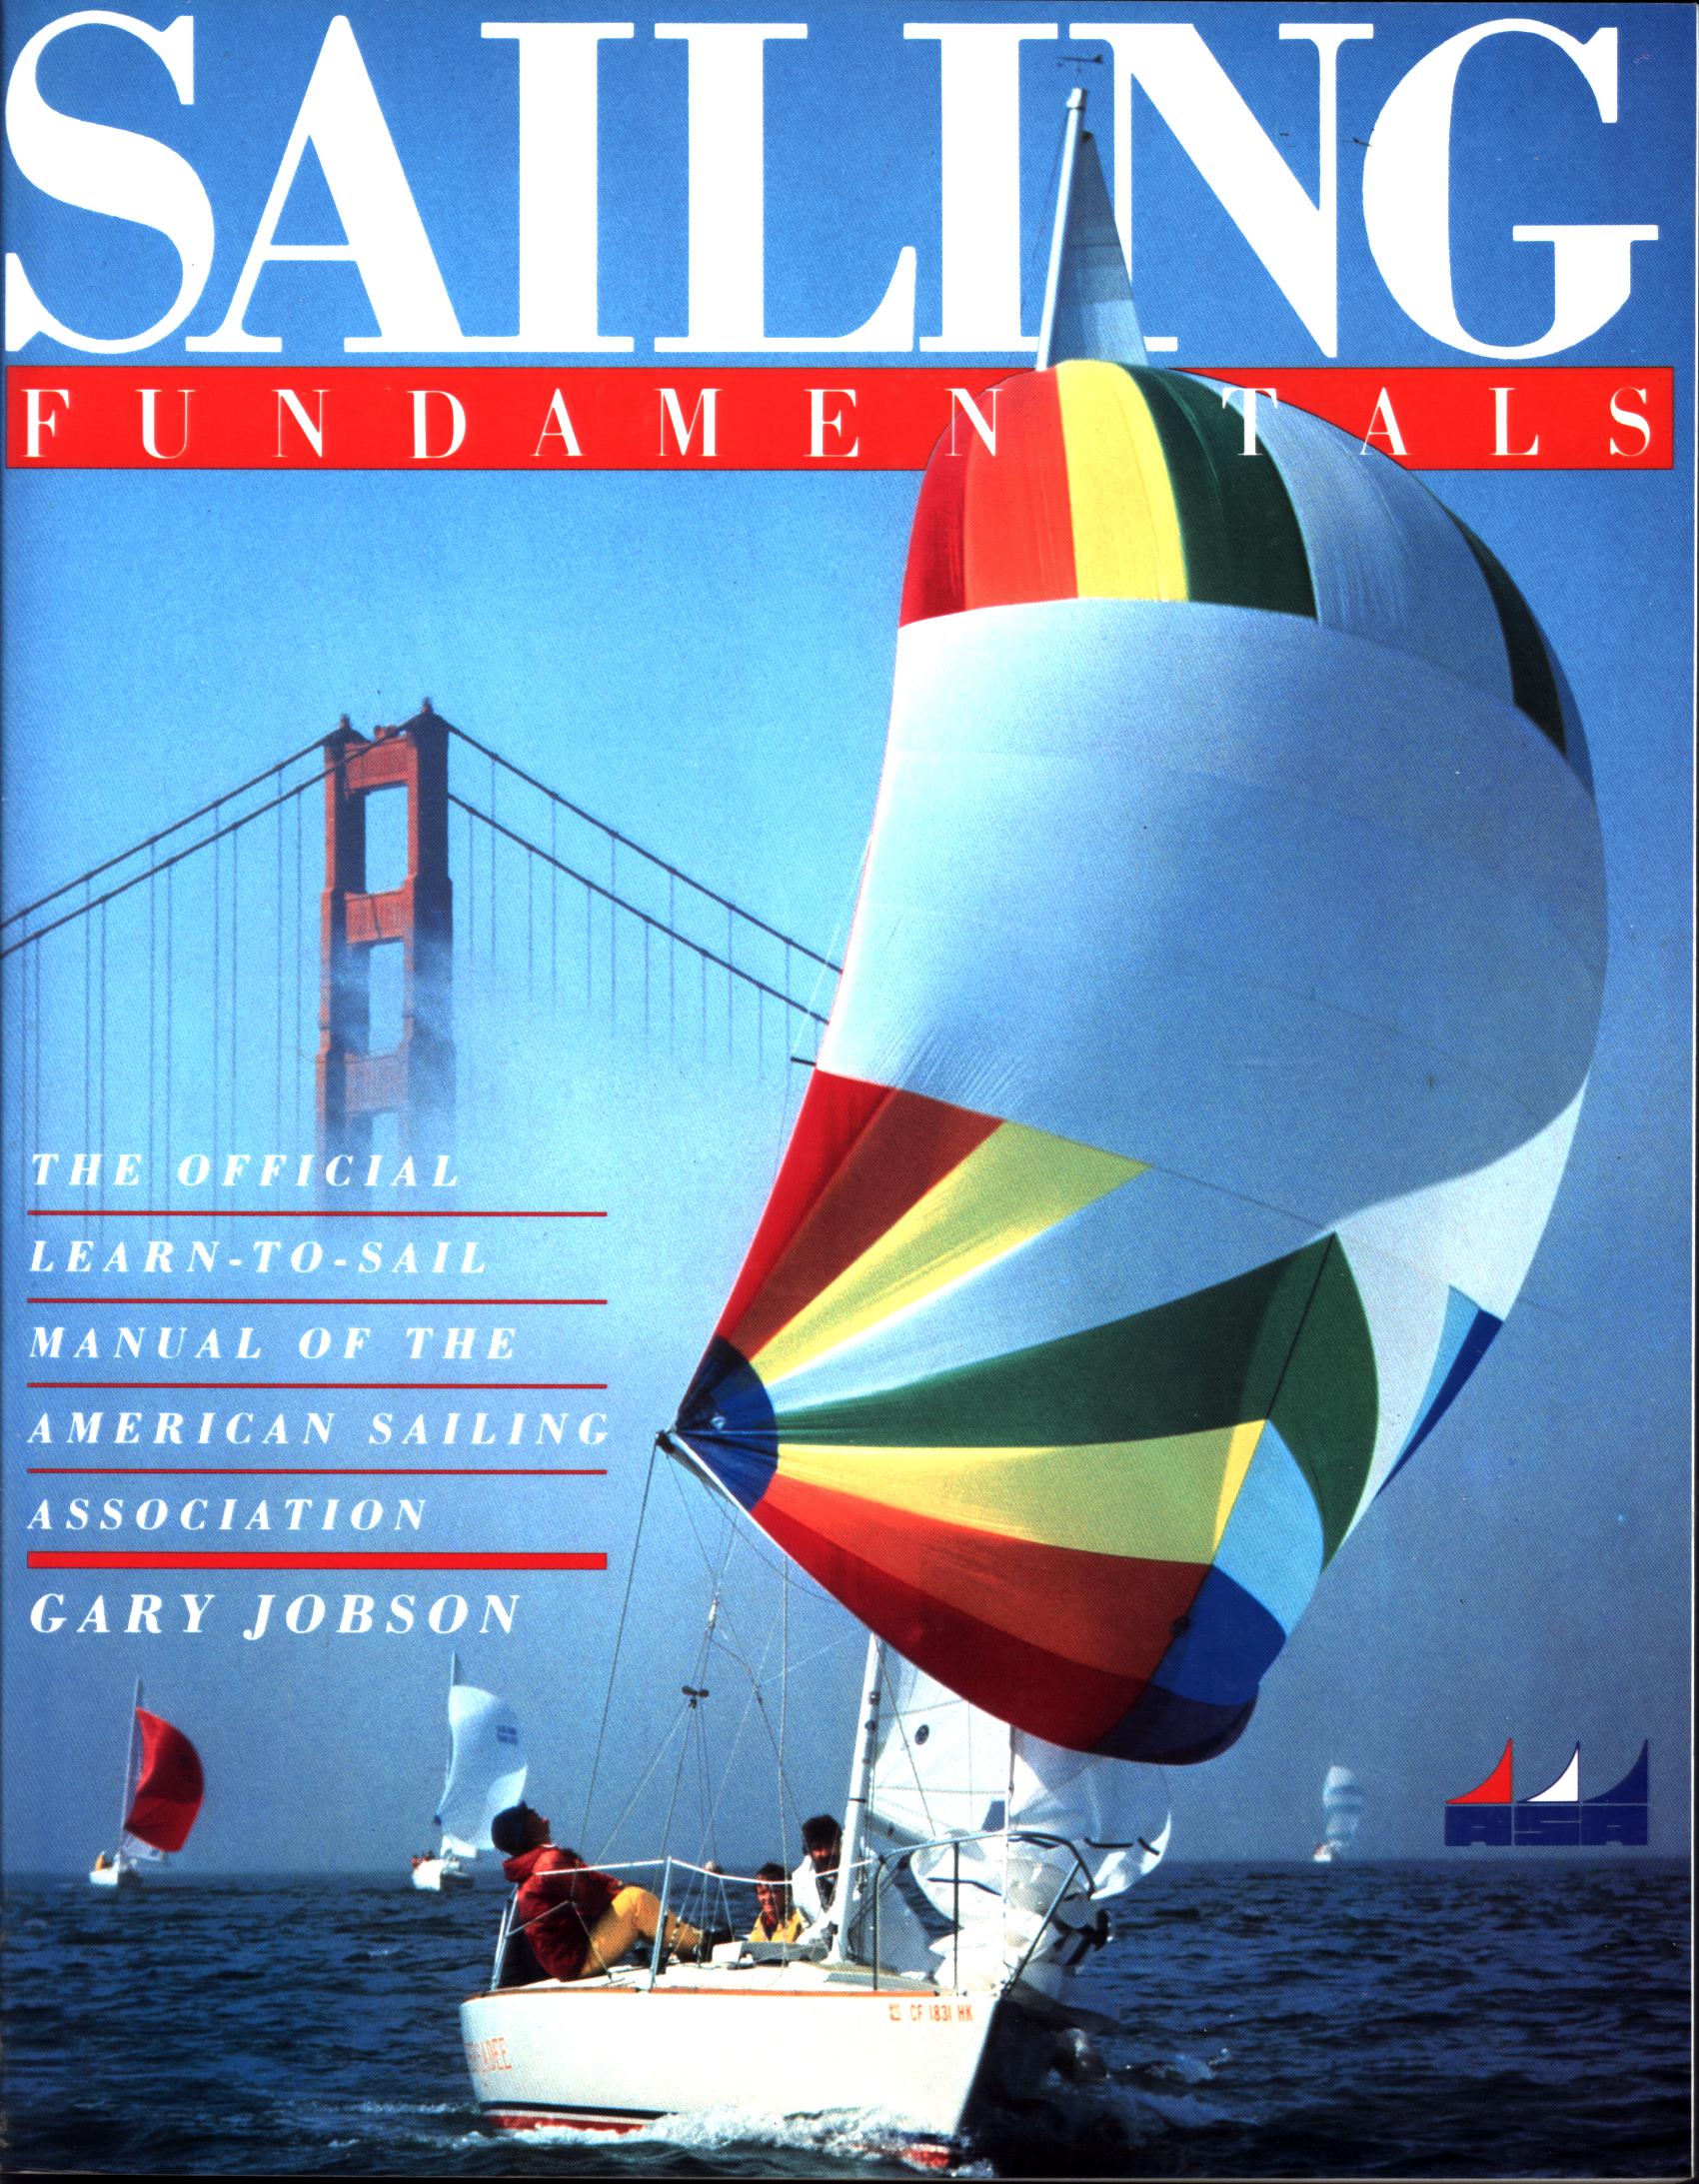 SAILING FUNDAMENTALS: the official learn-to-sail manual of the American Sailing Association. 